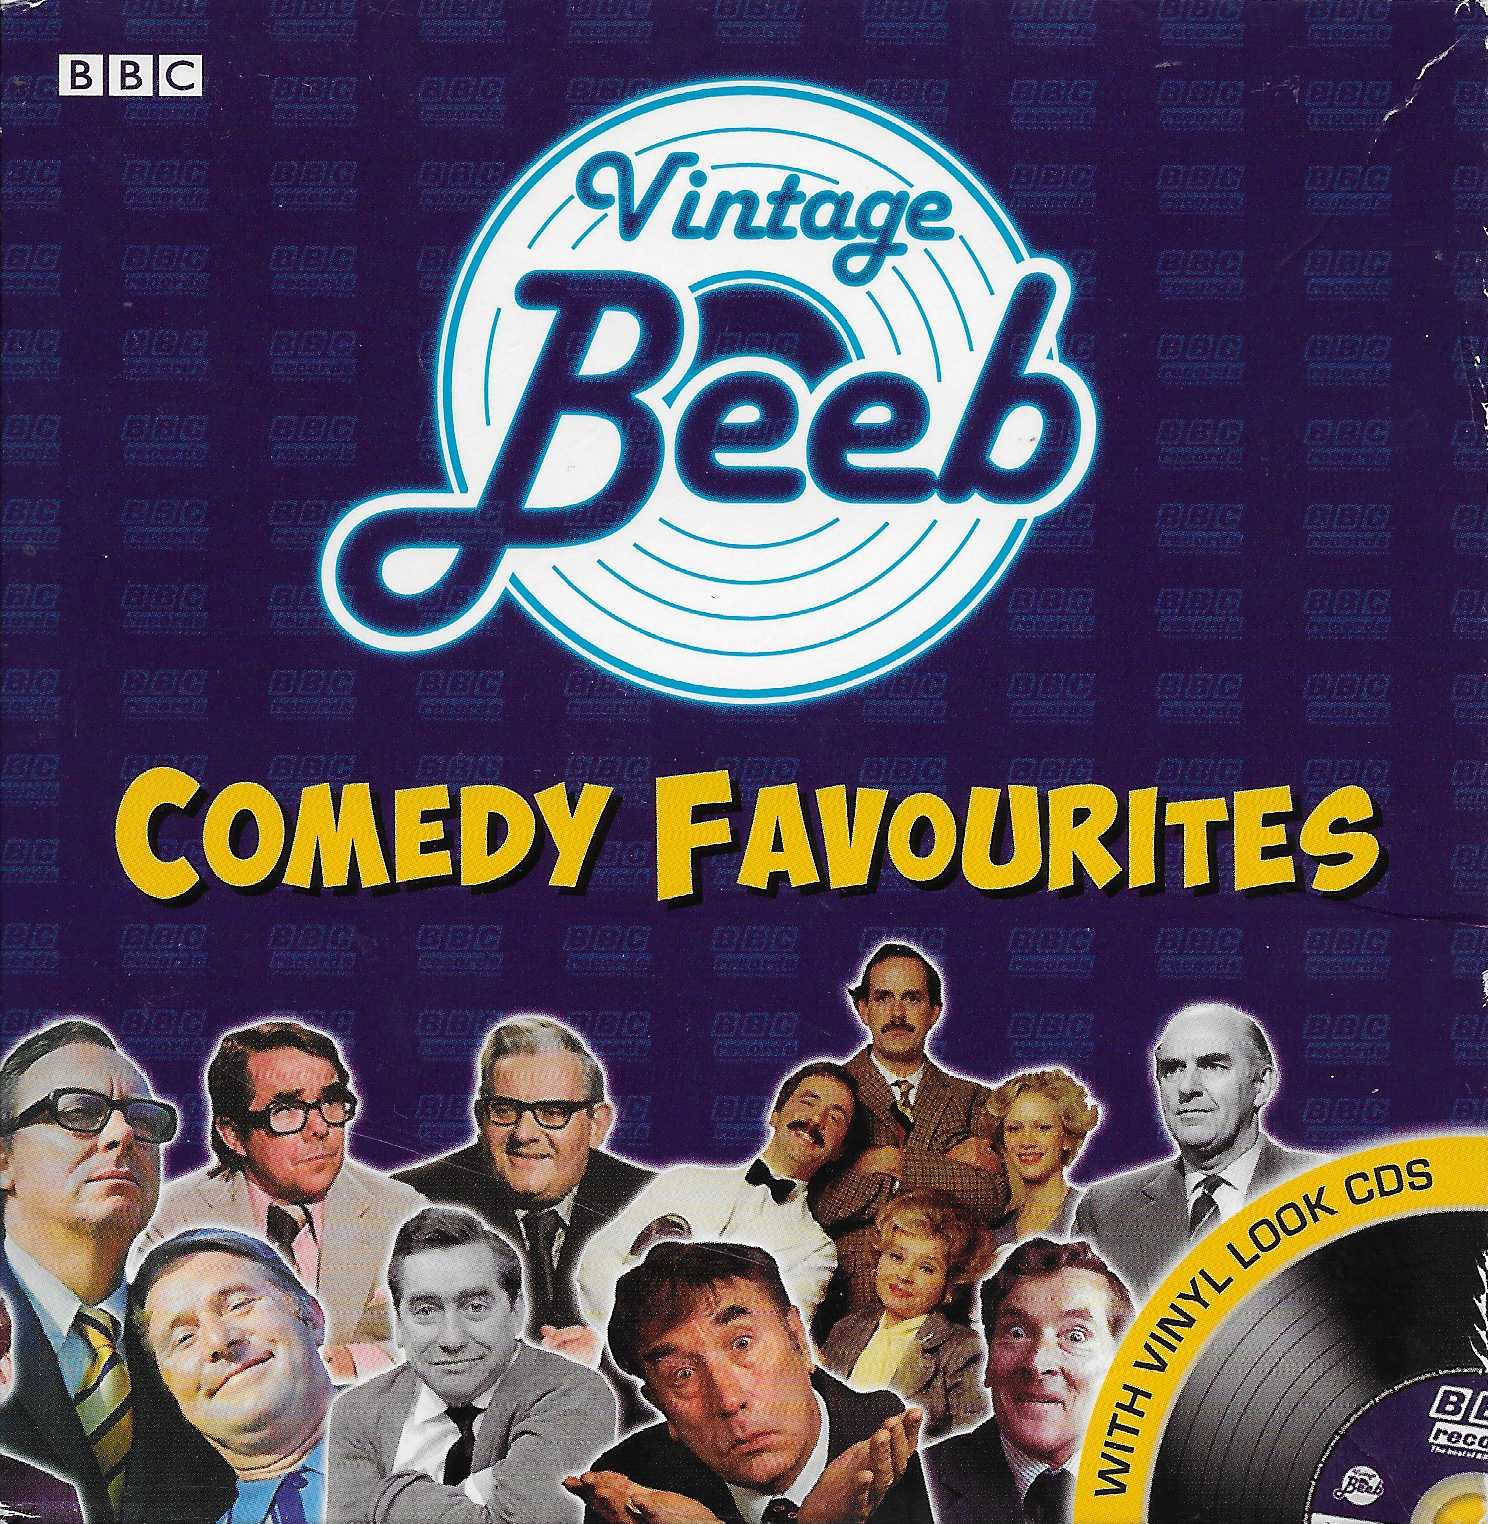 Picture of Vintage Beeb - Comedy favourites by artist Various from the BBC cds - Records and Tapes library